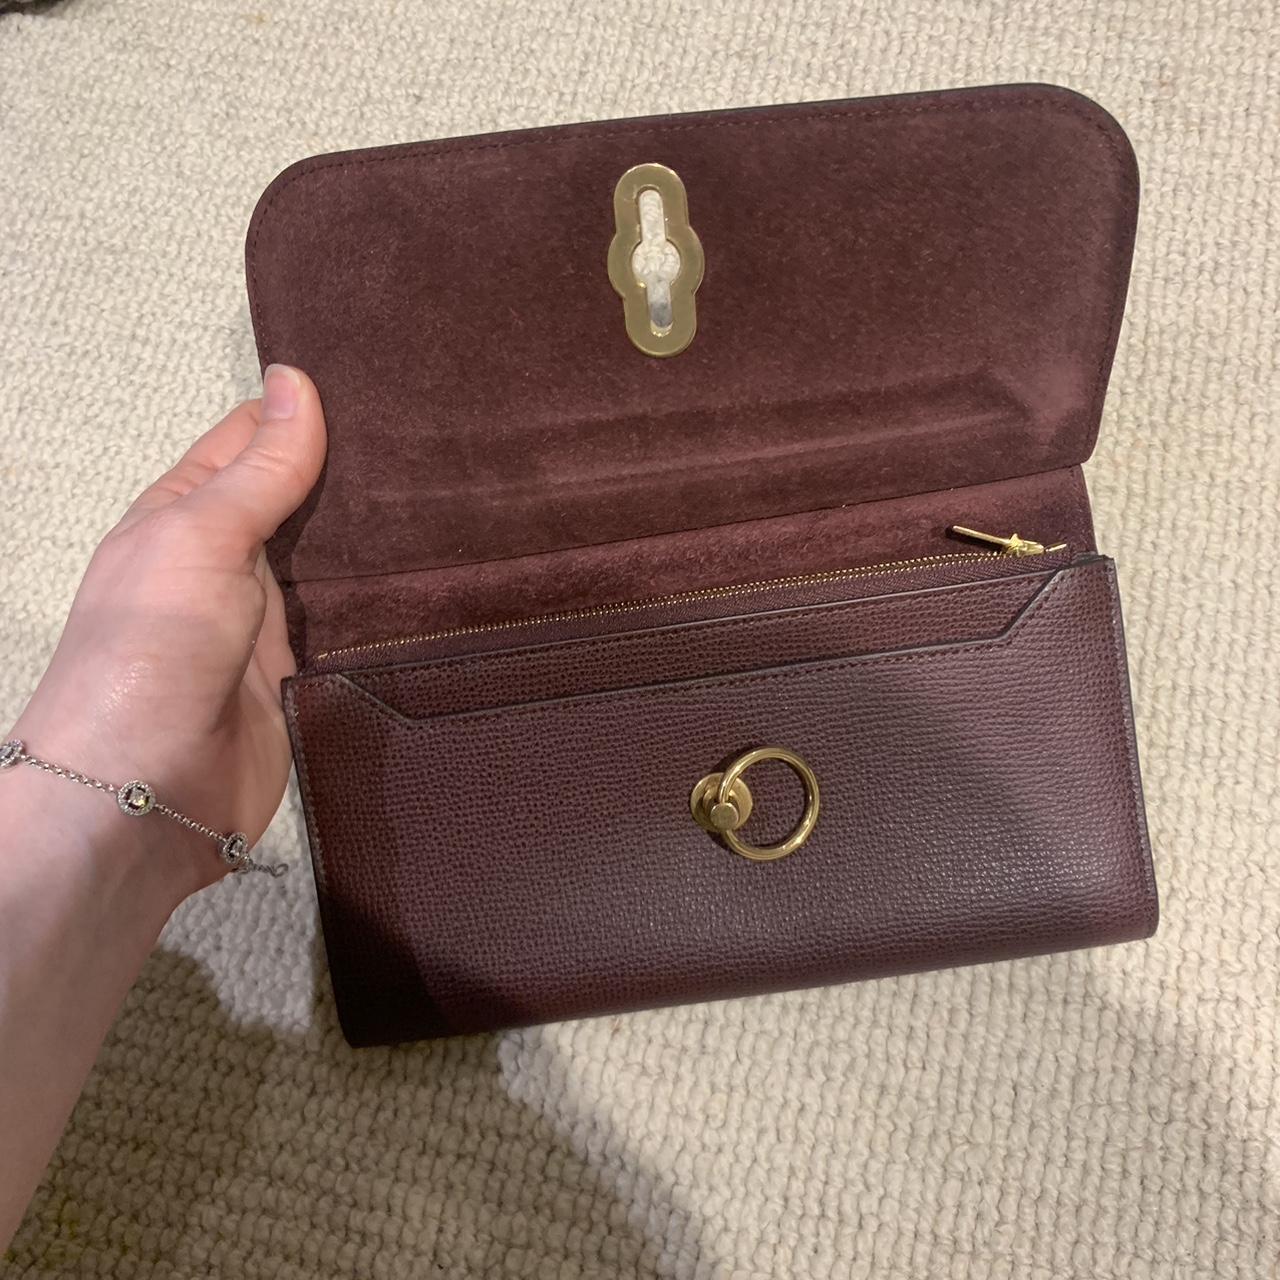 Mulberry Tessie Hobo Bag Review - YouTube